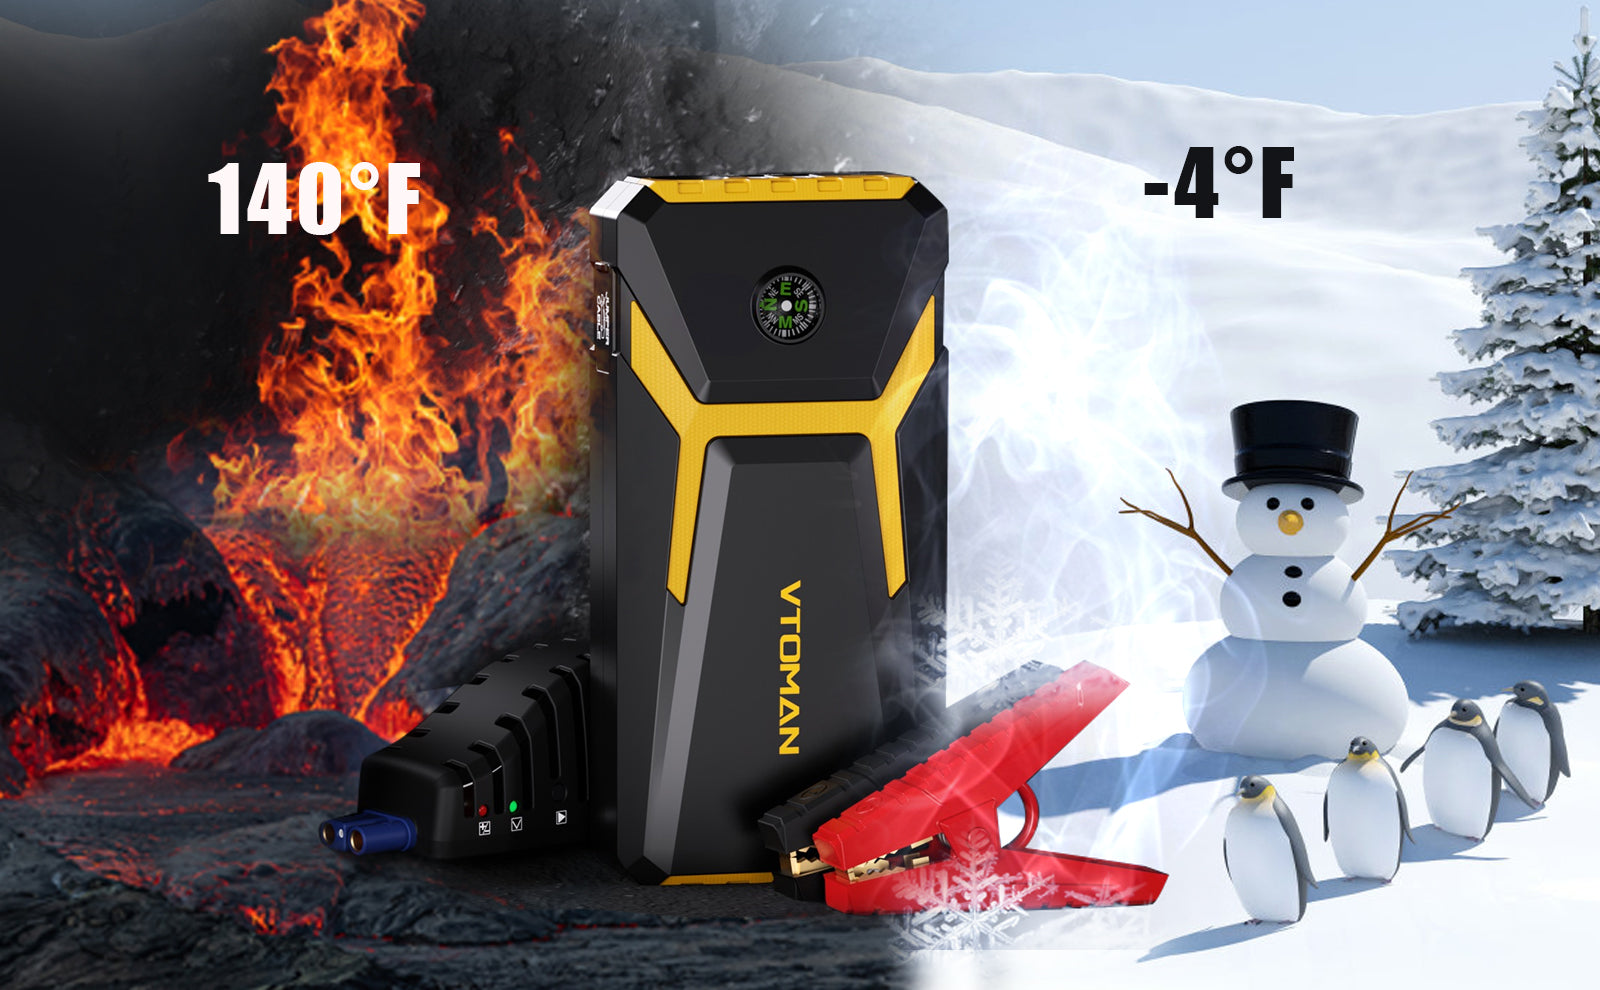 V6 Pro jump starter is your must-have companion in cold weather, enabling you to start your car within minutes and overcome battery depletion effortlessly.